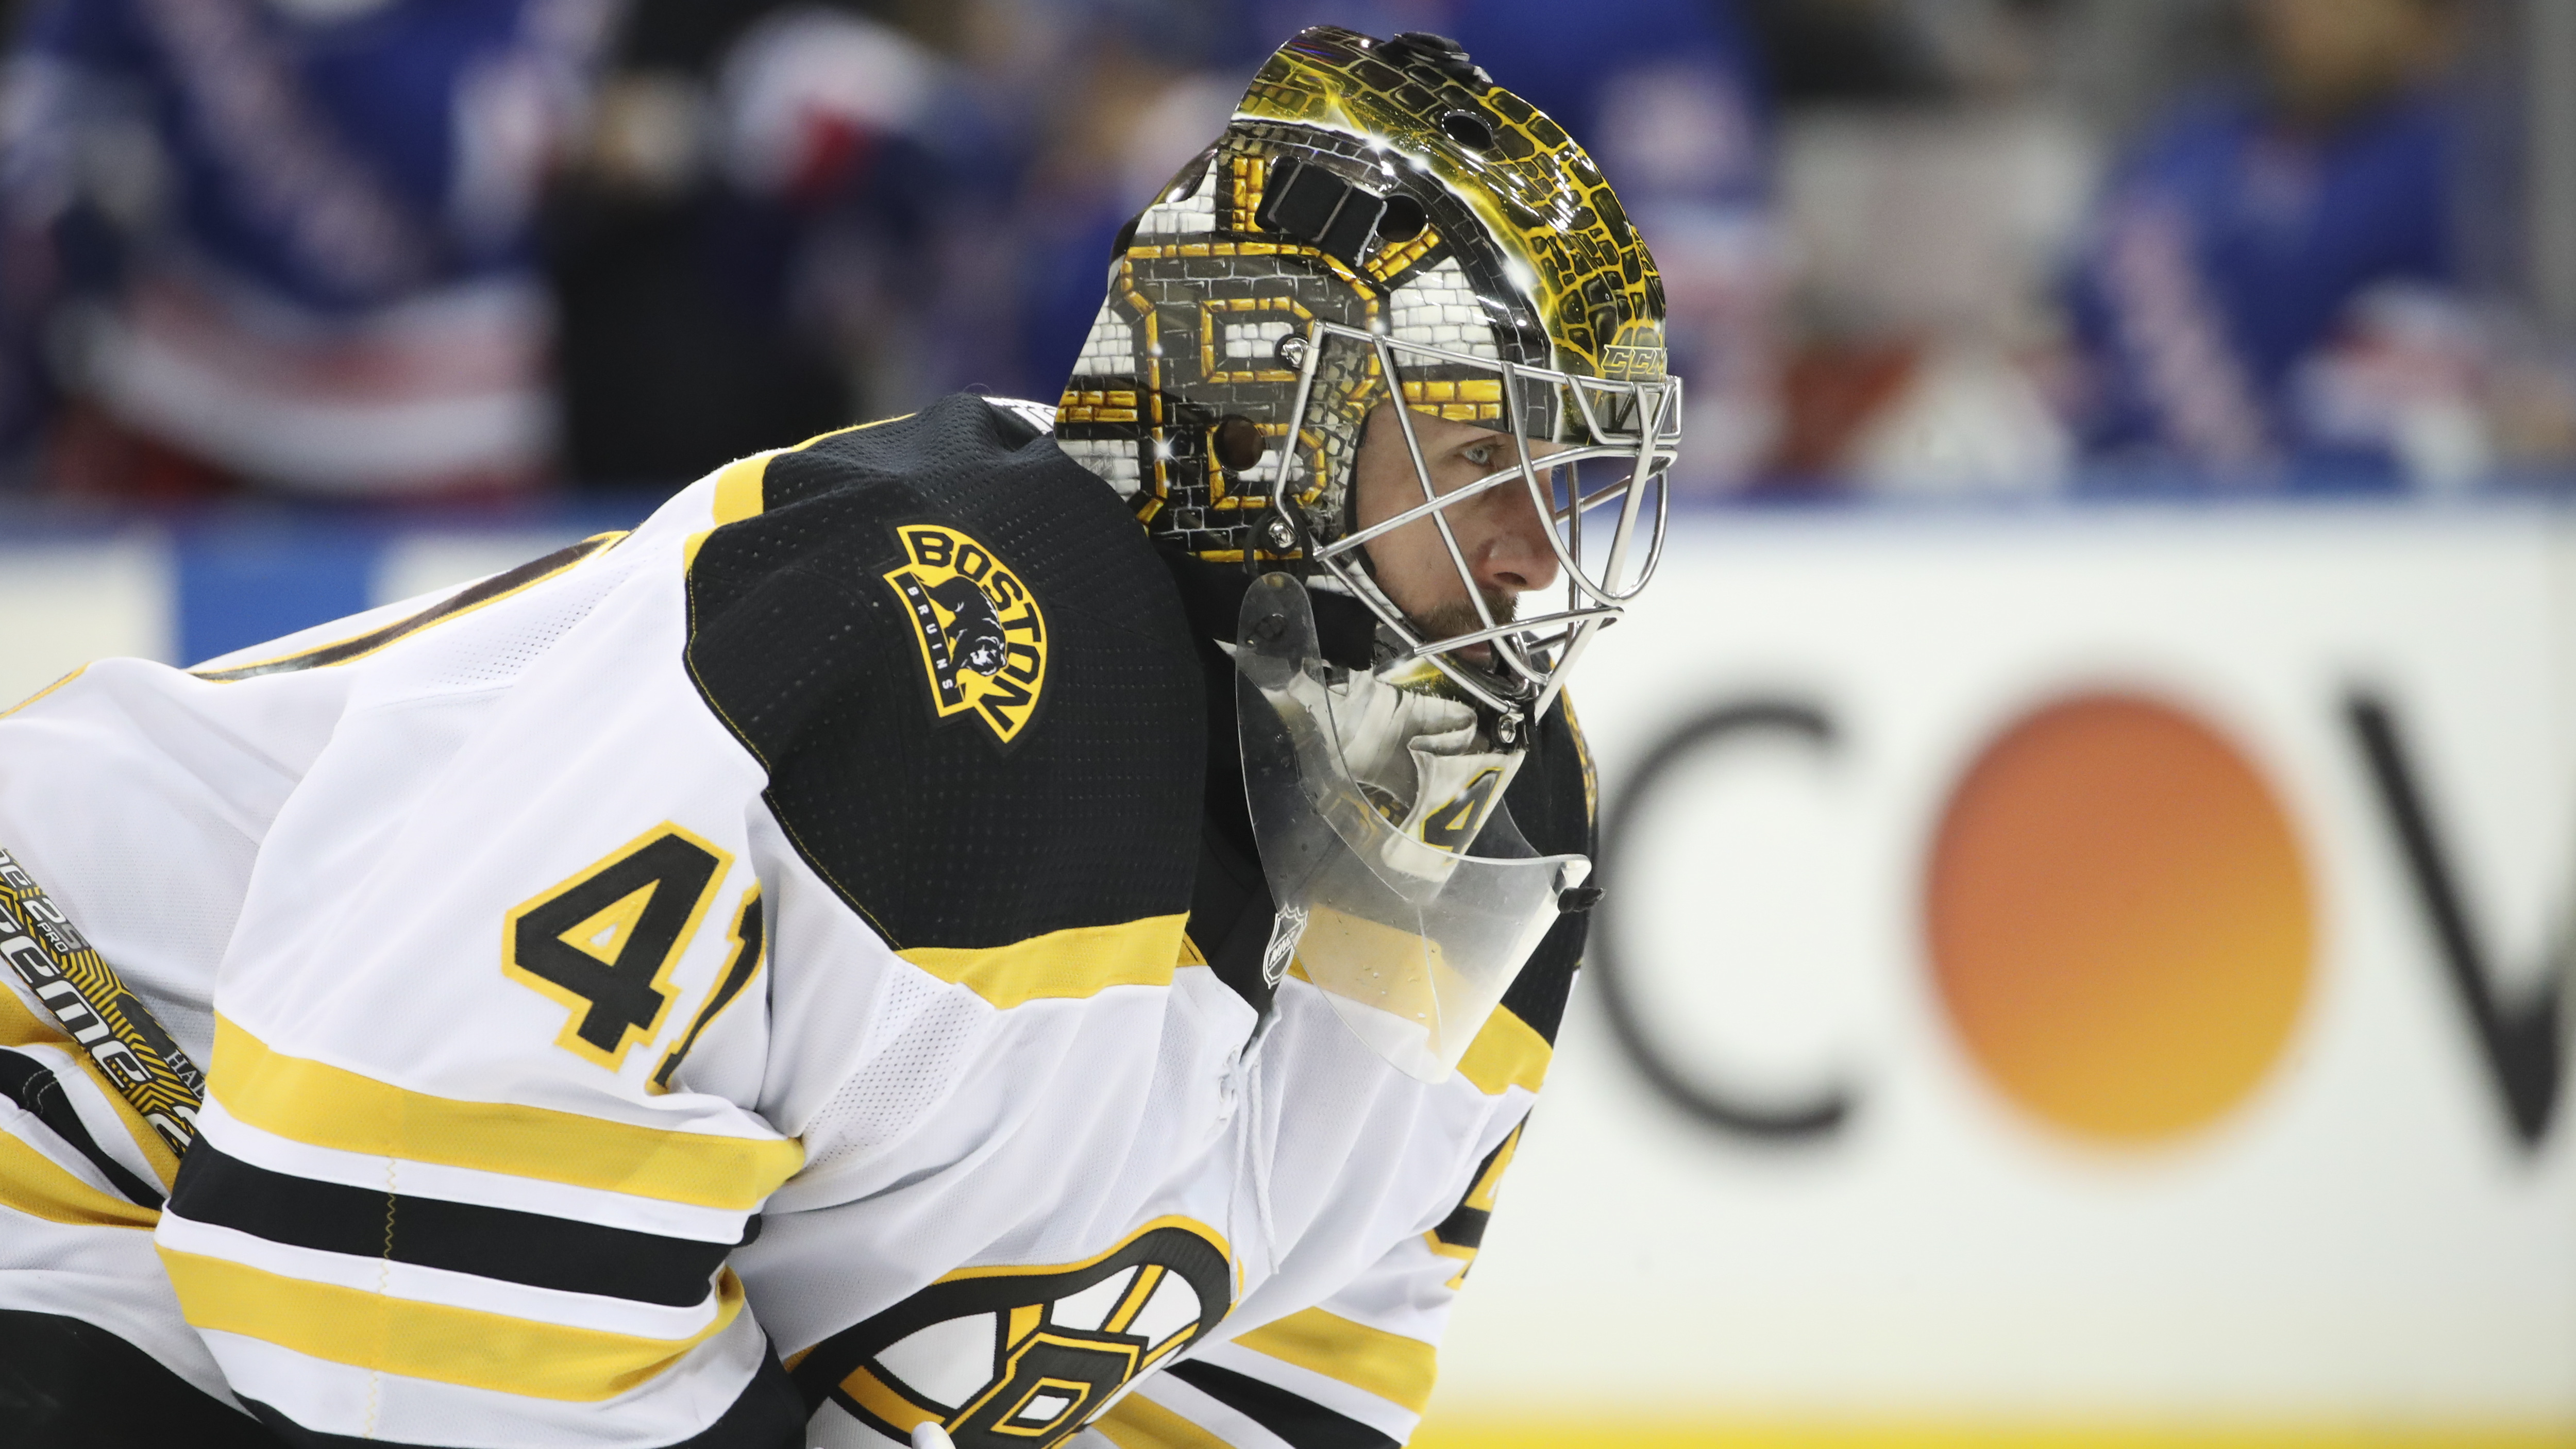 Bruins goalie Rask opts out of playoffs to be with family